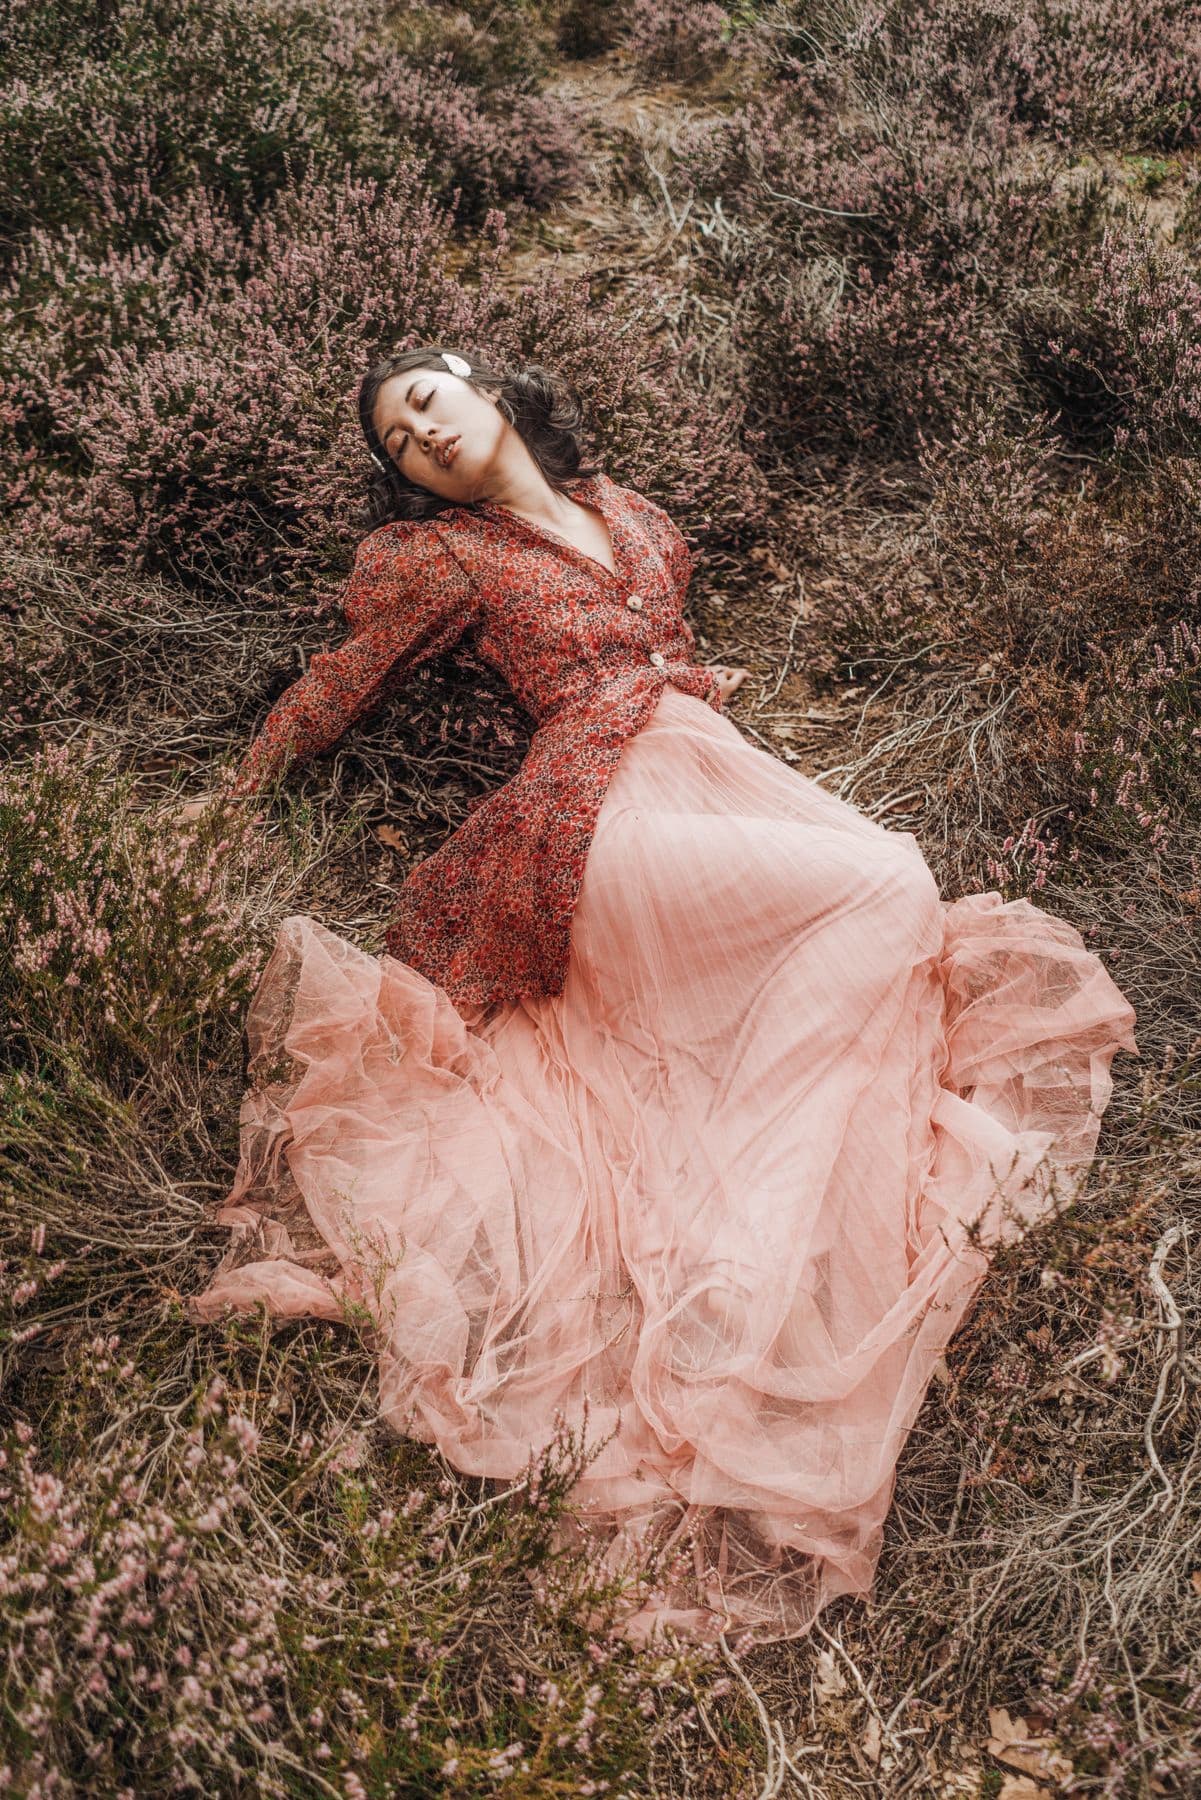 Stock photo of female model lies among wildflowers in a pink skirt and a long blouse.